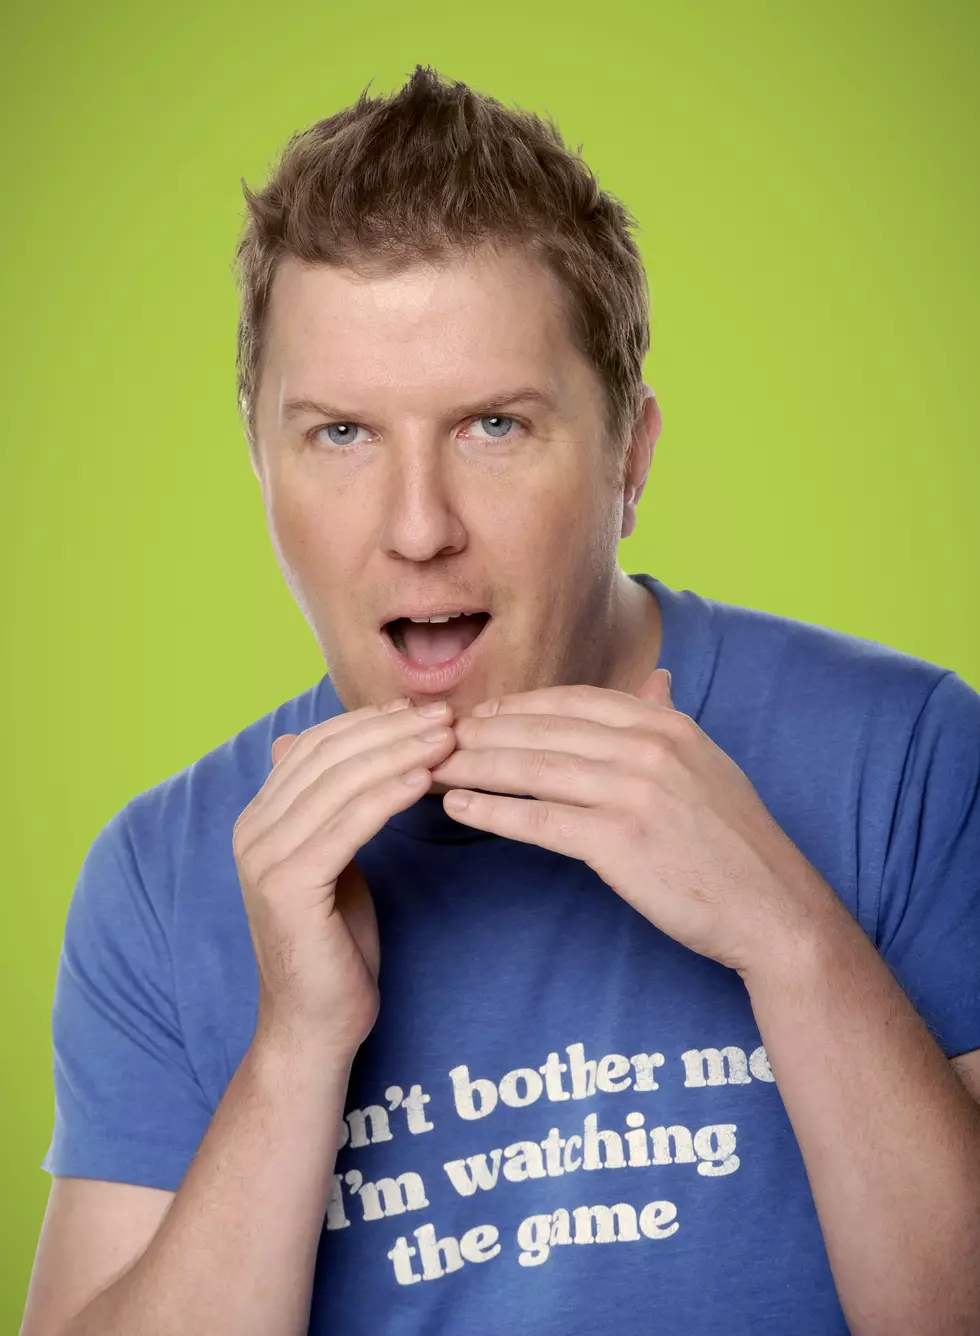 Nick Swardson Was A Big Troublemaker In High School